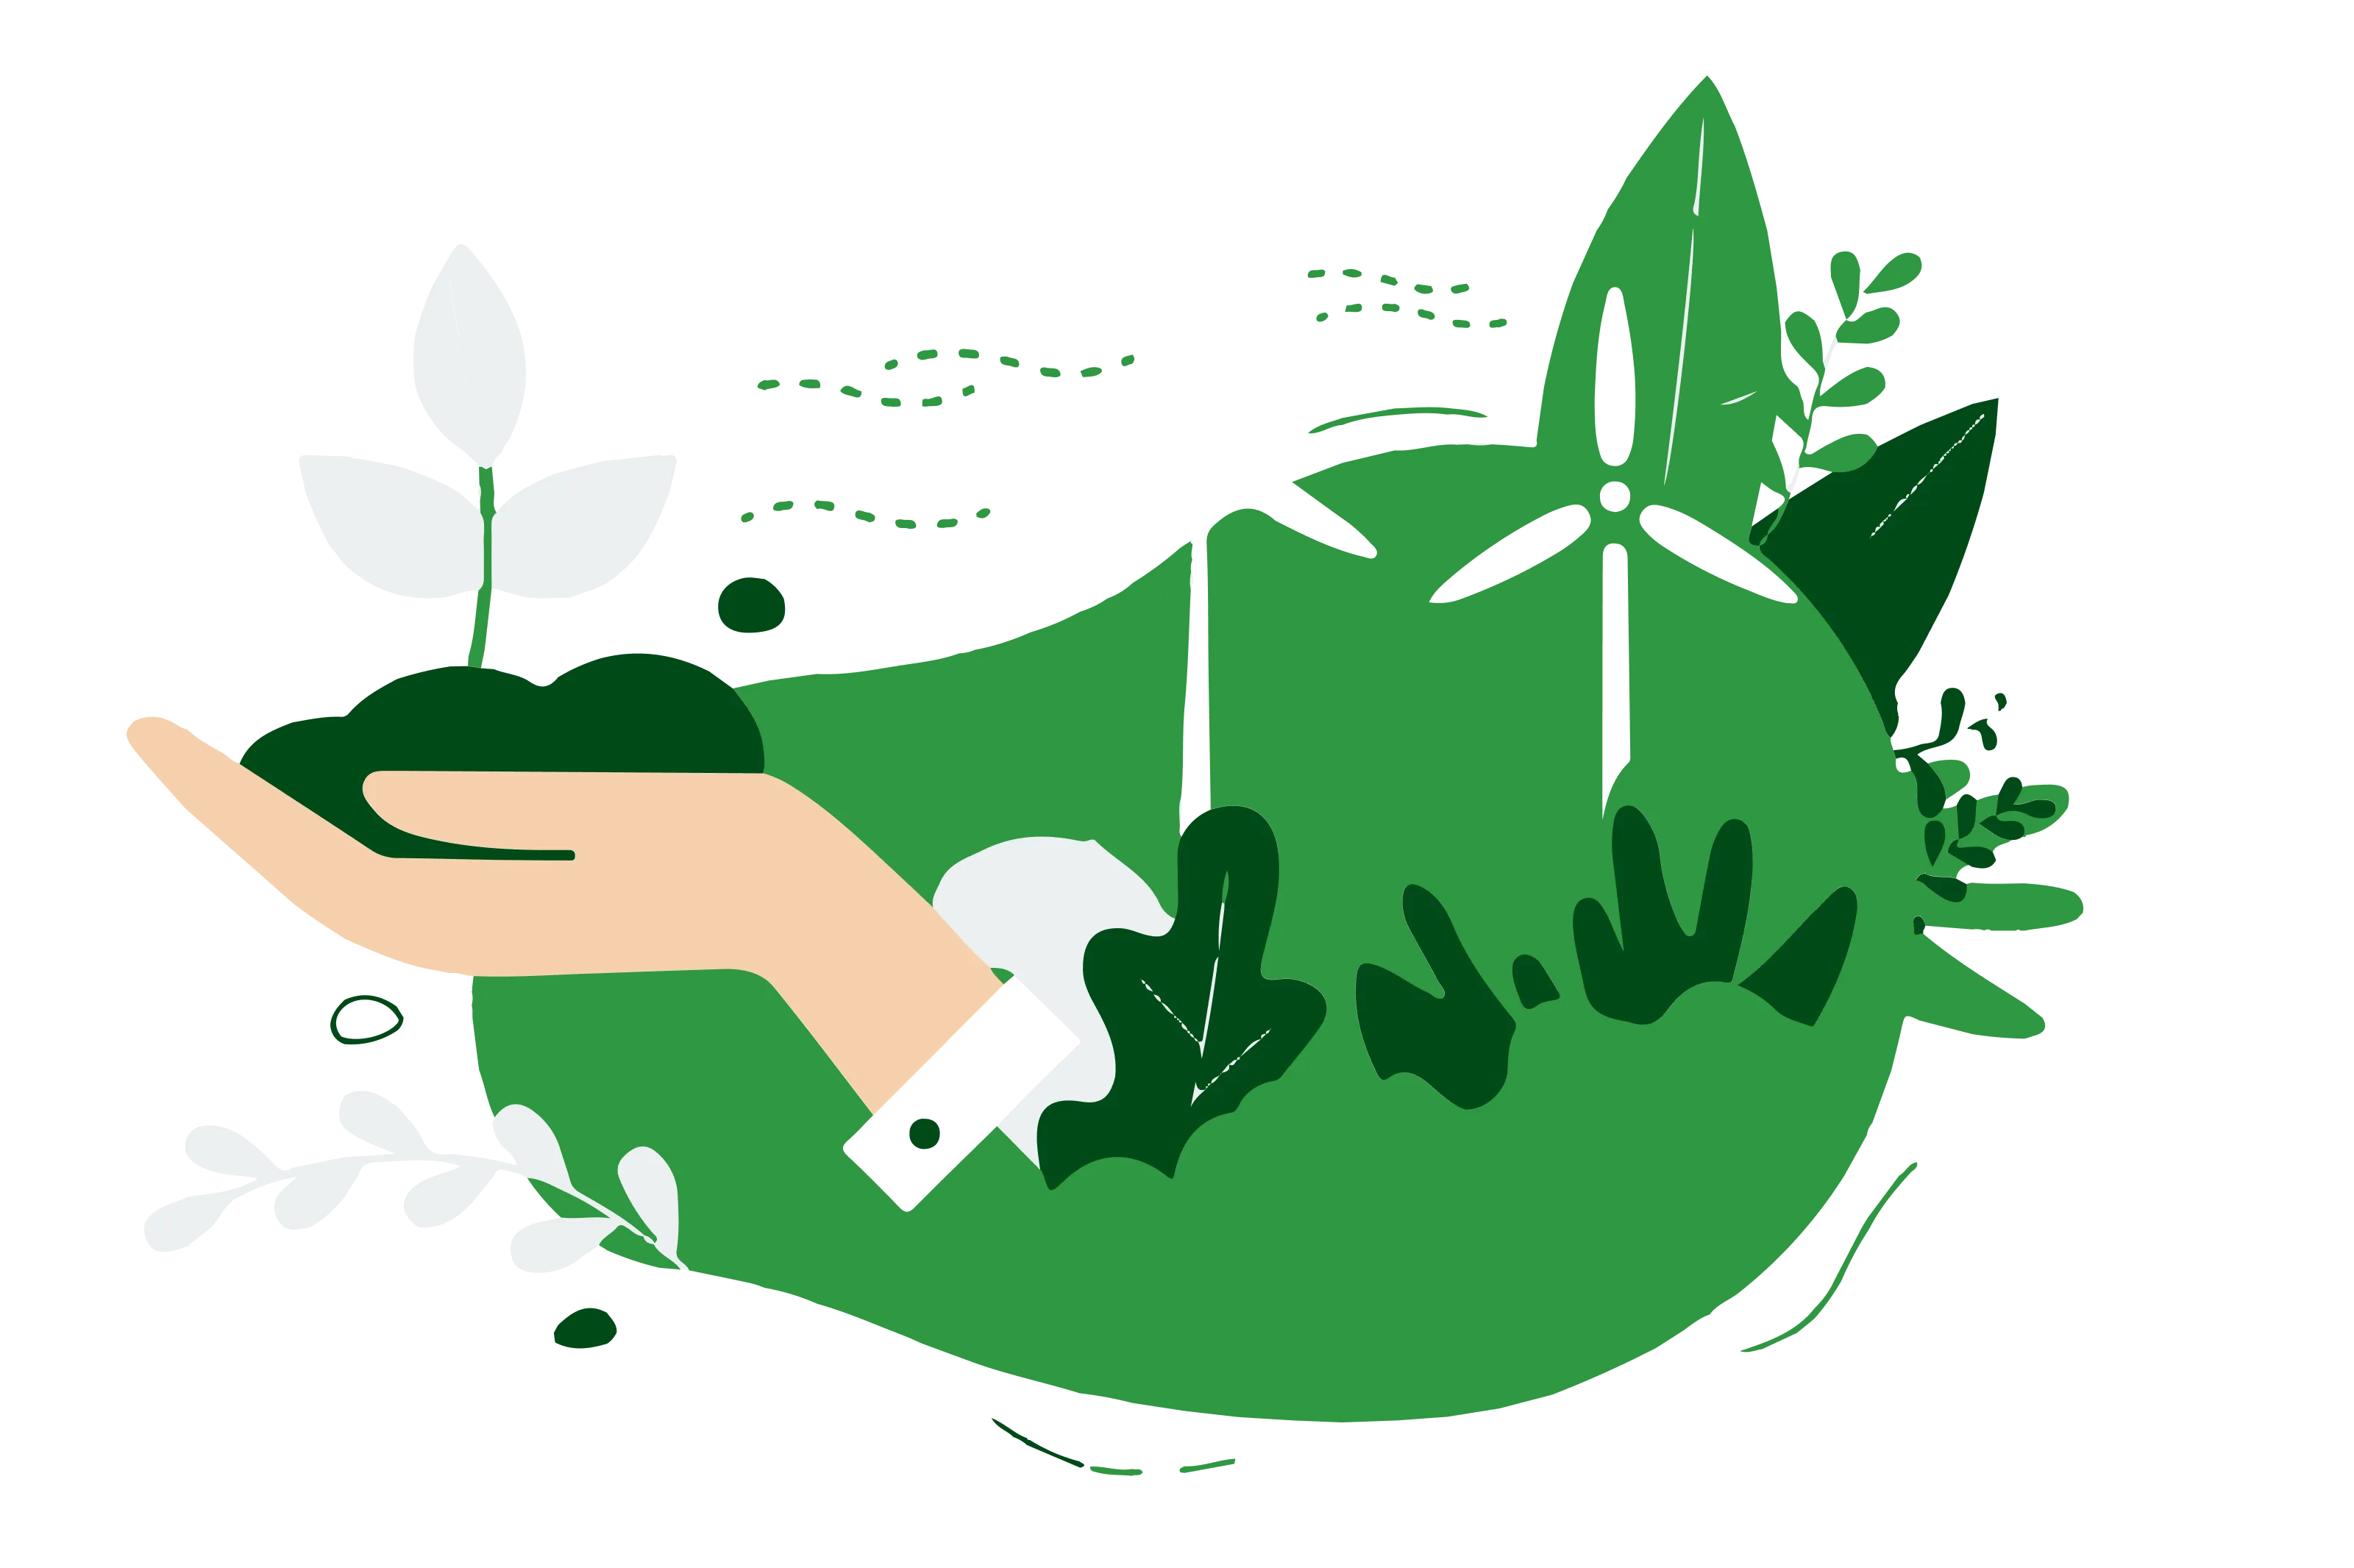 An image illustrating environmental sustainability. The visual shows a hand holding a small amount of sand with a growing plant emerging from it. The image highlights the concept that even small actions, such as planting a seed in a handful of soil, can contribute to environmental sustainability. The image suggests that environmental sustainability is about nurturing and protecting the natural world, and that we all have a role to play in creating a more sustainable future. The image serves as a reminder that by taking care of the environment, we are also taking care of ourselves and future generations.